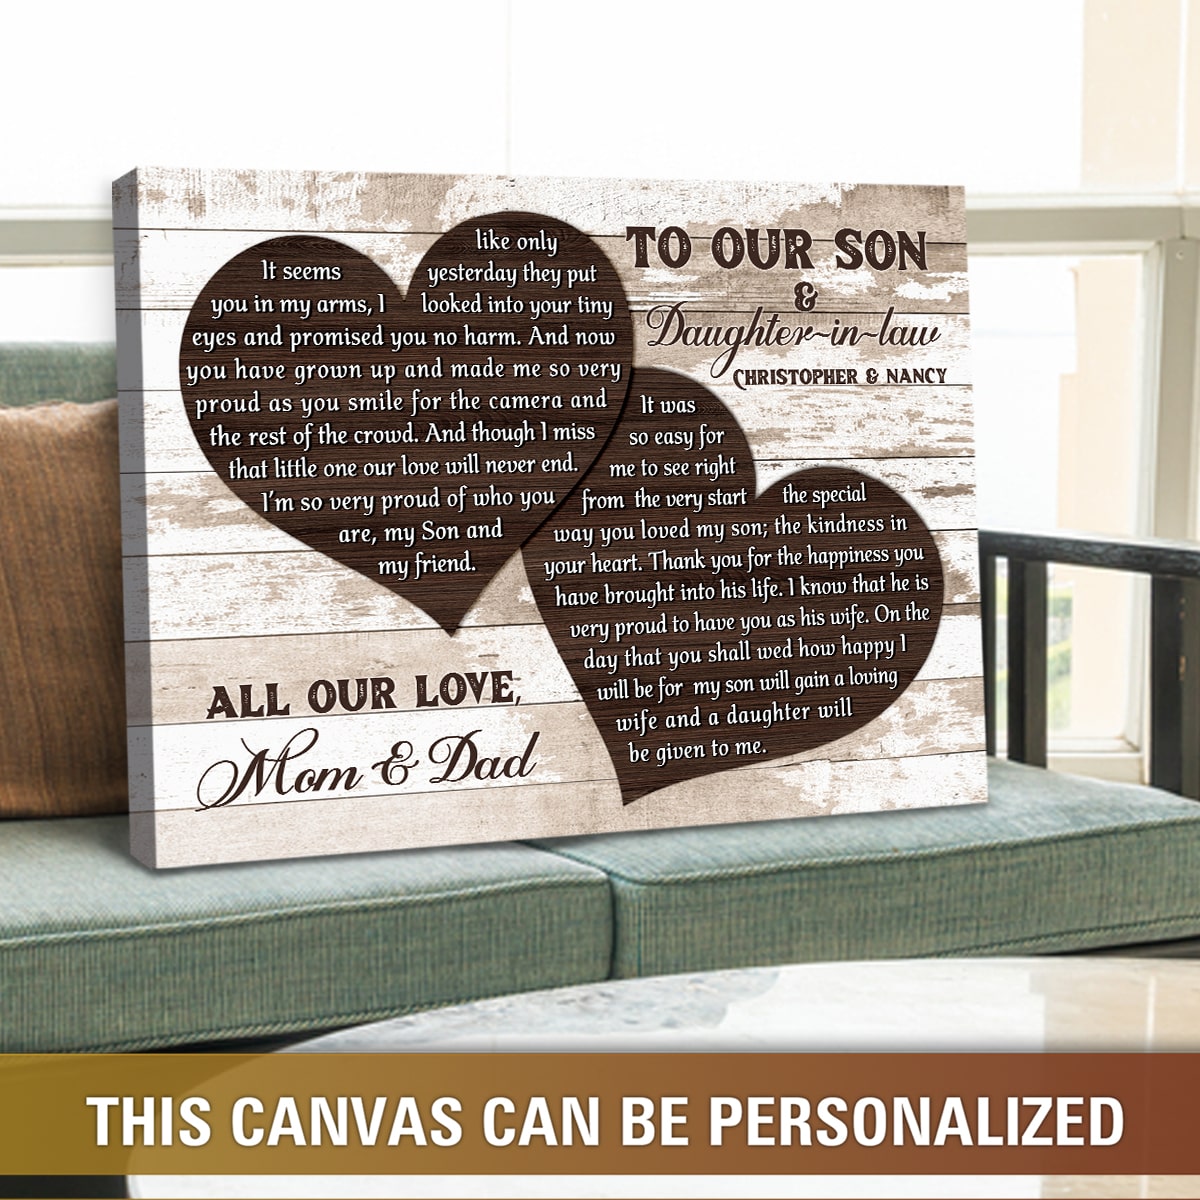 https://images.ohcanvas.com/ohcanvas_com/2022/07/26202533/personalized-wedding-gifts-for-son-and-daughter-in-law-gift-for-bride-from-mother-of-groom01.jpg